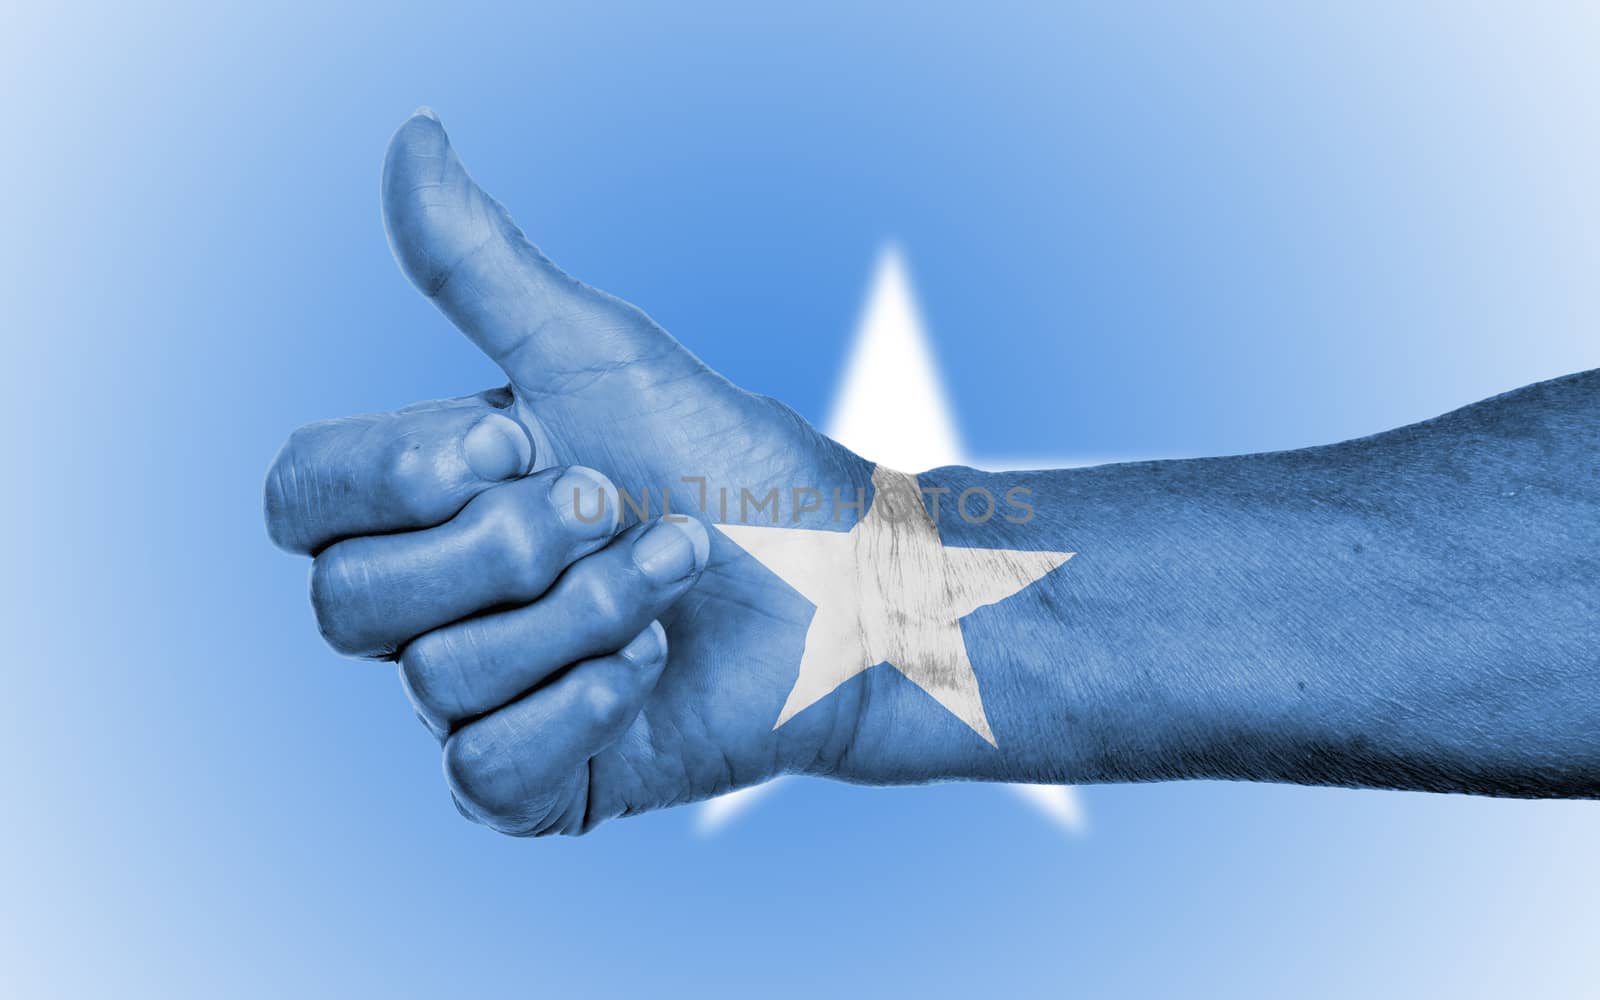 Old woman giving the thumbs up sign, isolated, flag of Somalia